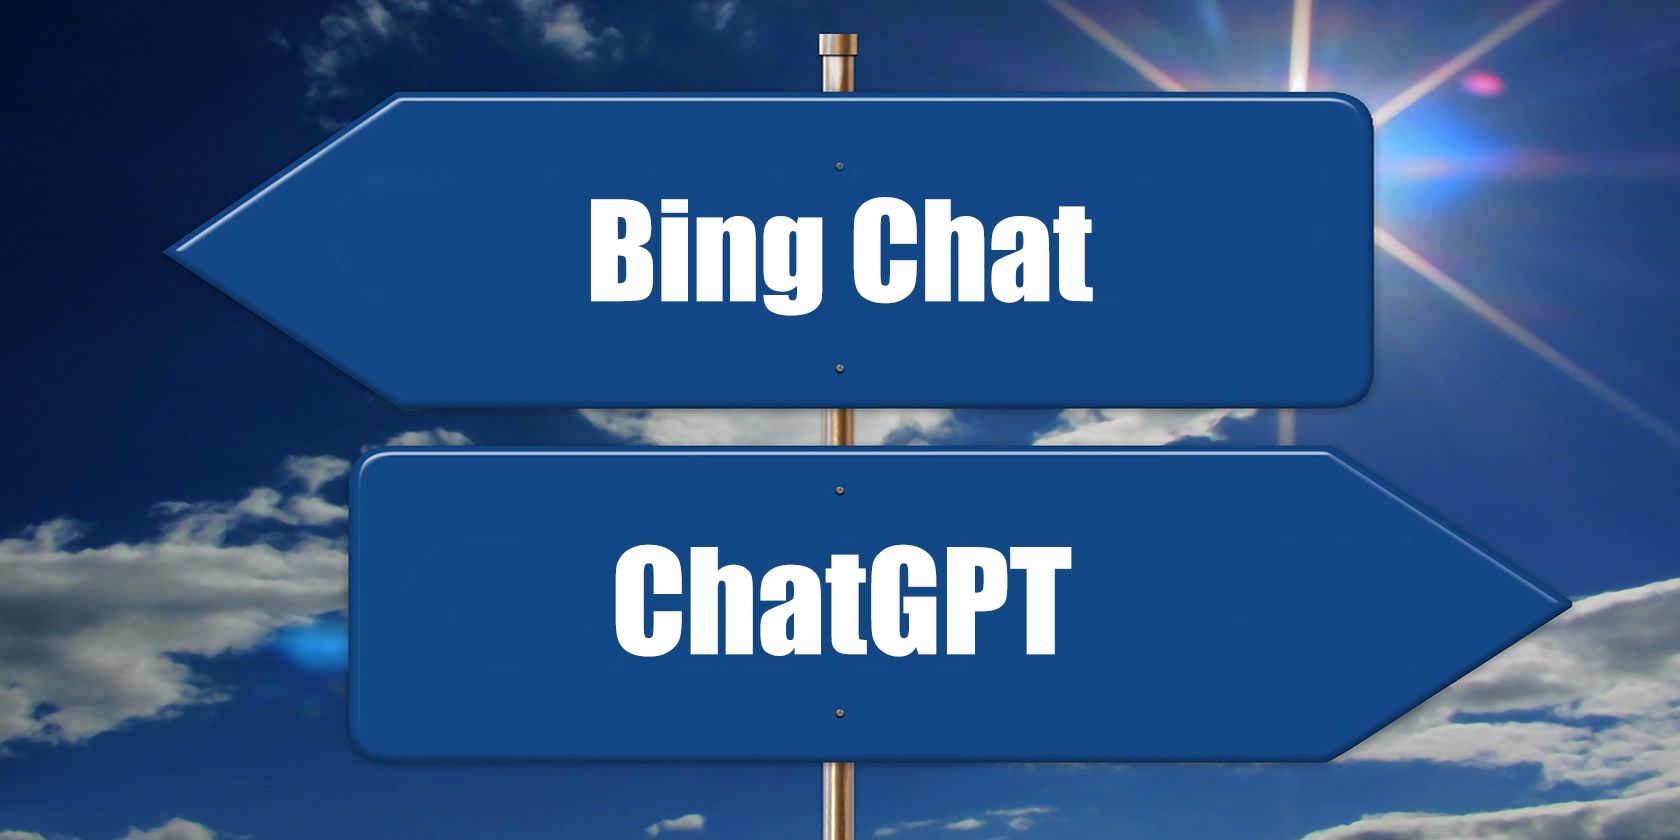 Picture showing Bing Chat and ChatGPT on arrowed sigsn